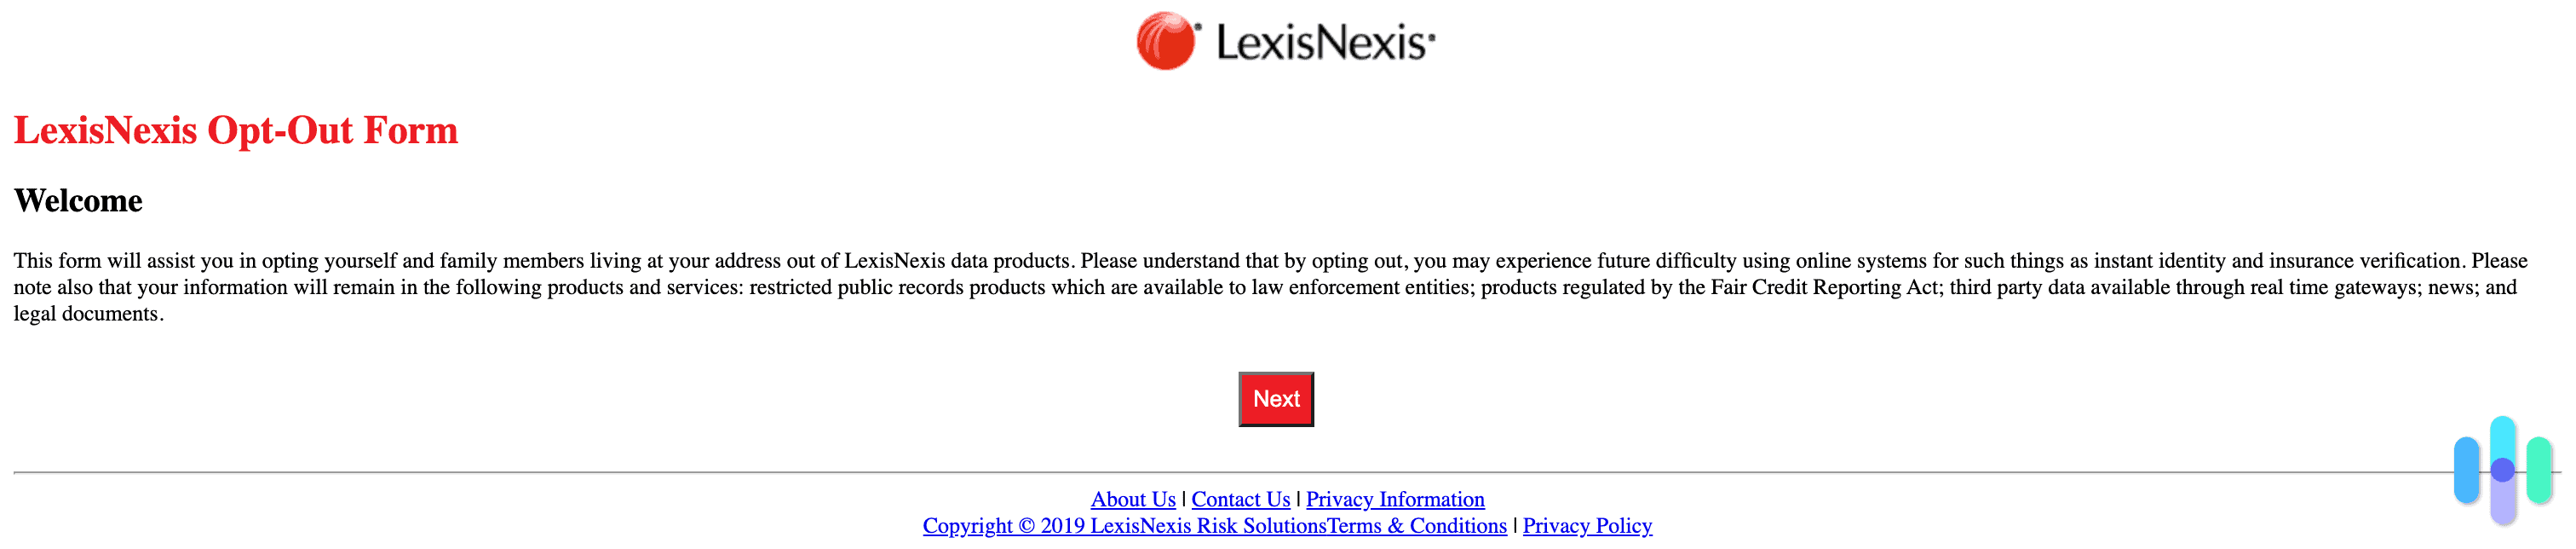 The LexisNexis opt out form welcome message